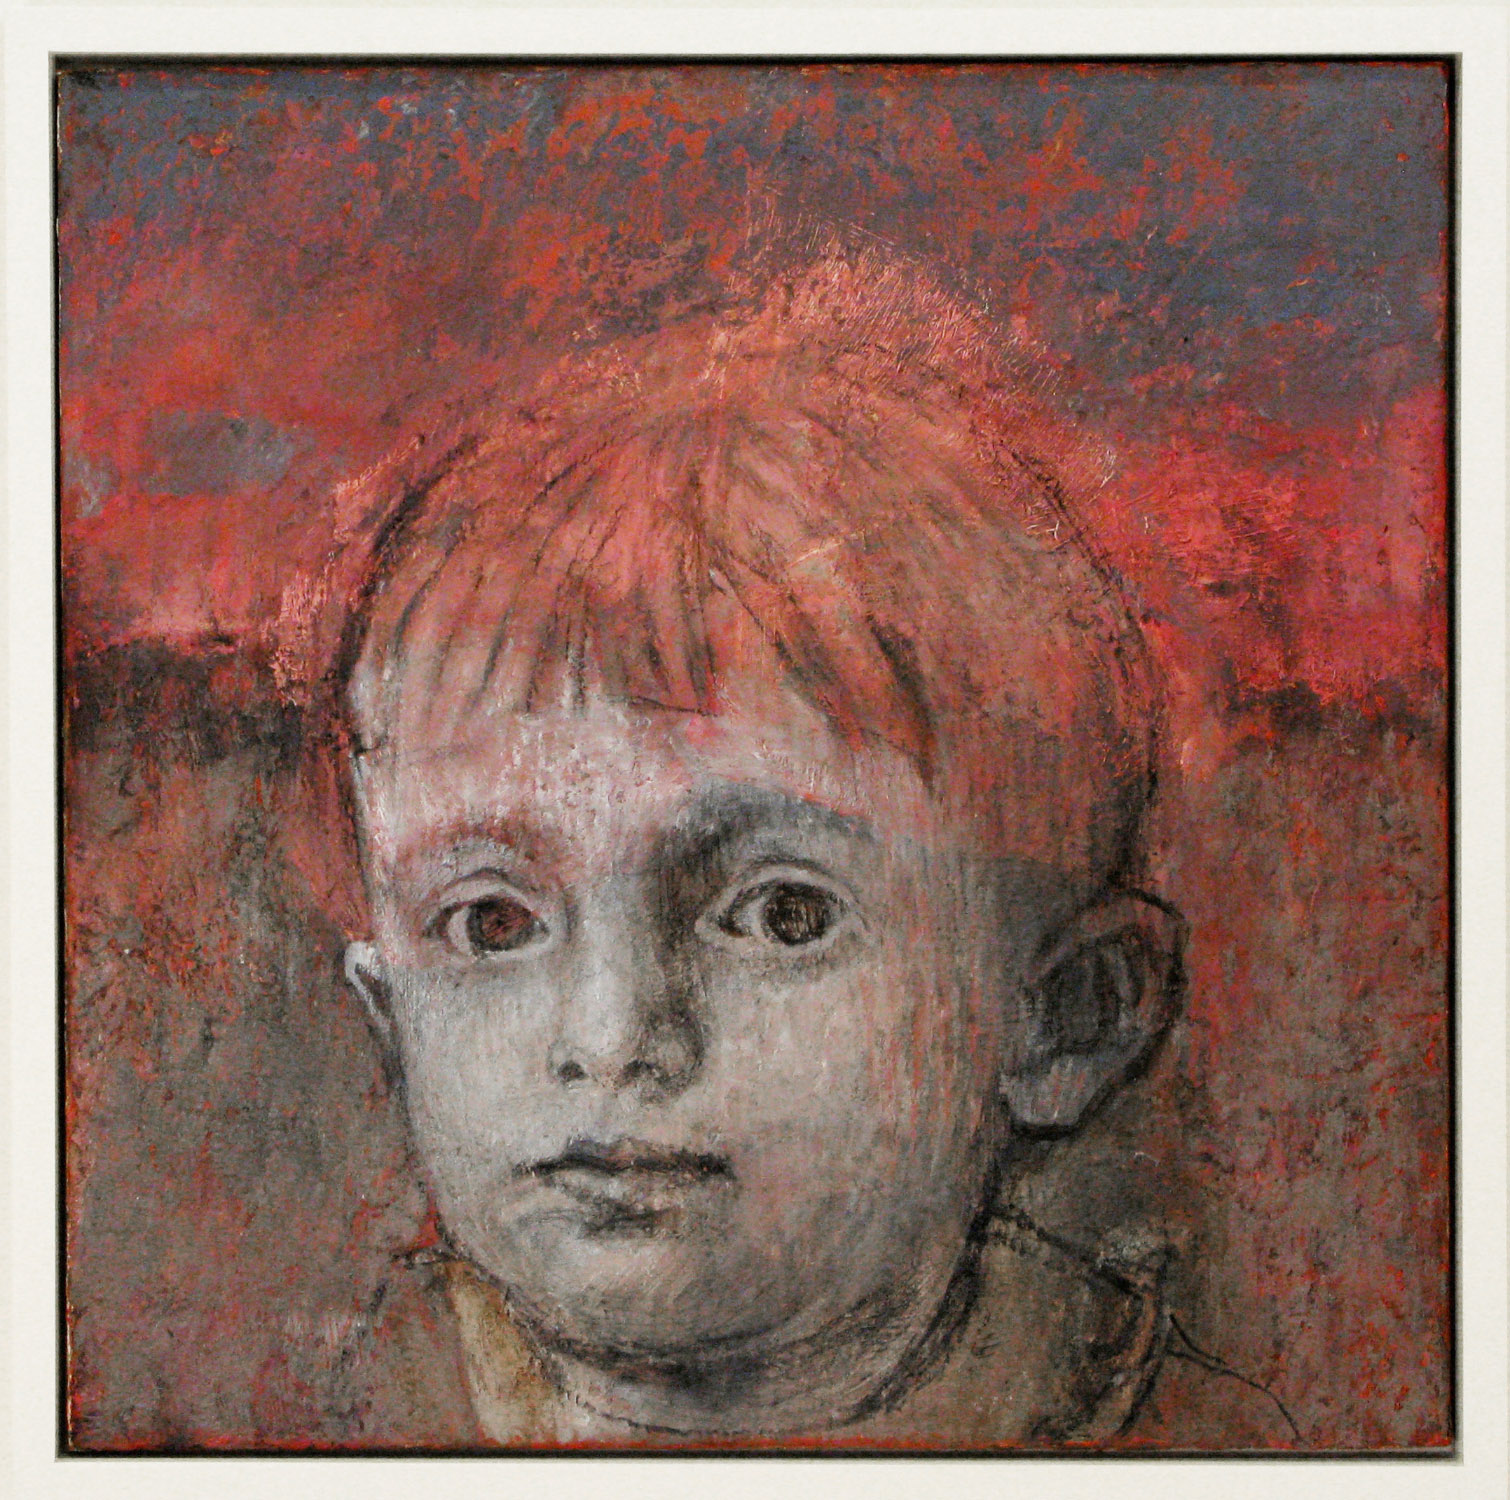 5bc(0) - Guardian Child, oil, charcoal on charred wood, 22x22 in. 2005.jpg